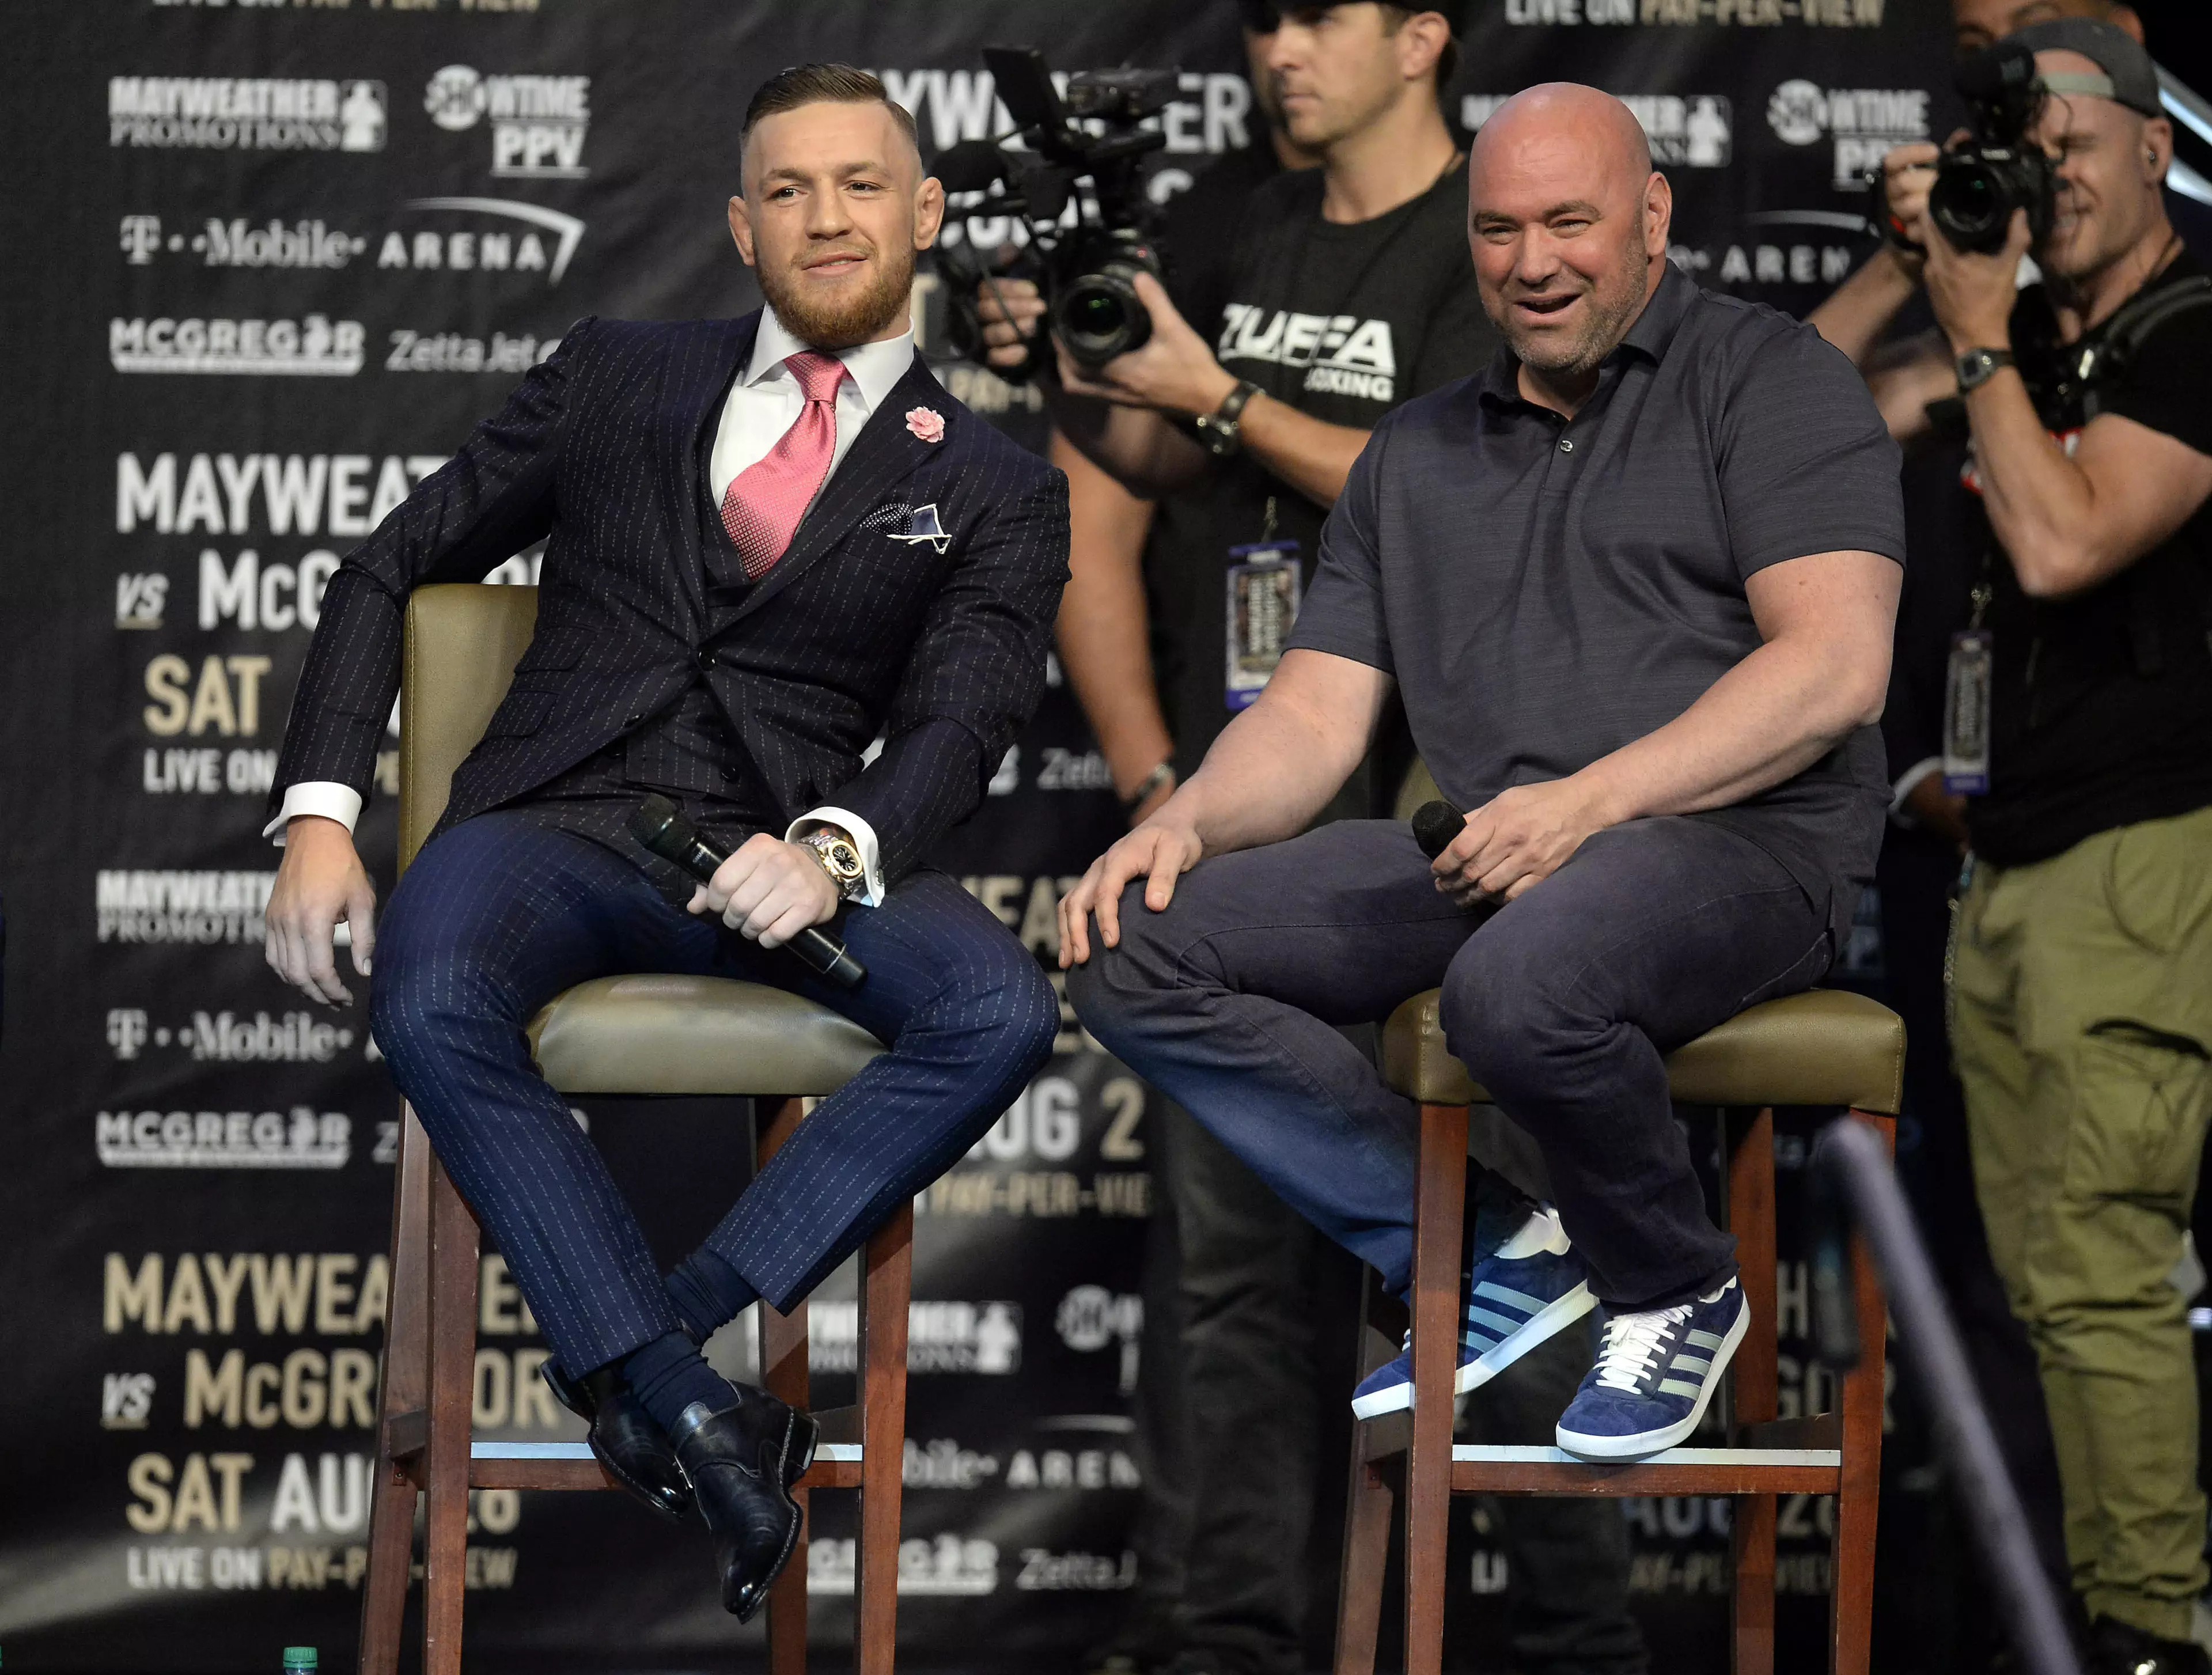 Dana White and Conor McGregor have engaged in a war of words on social media.